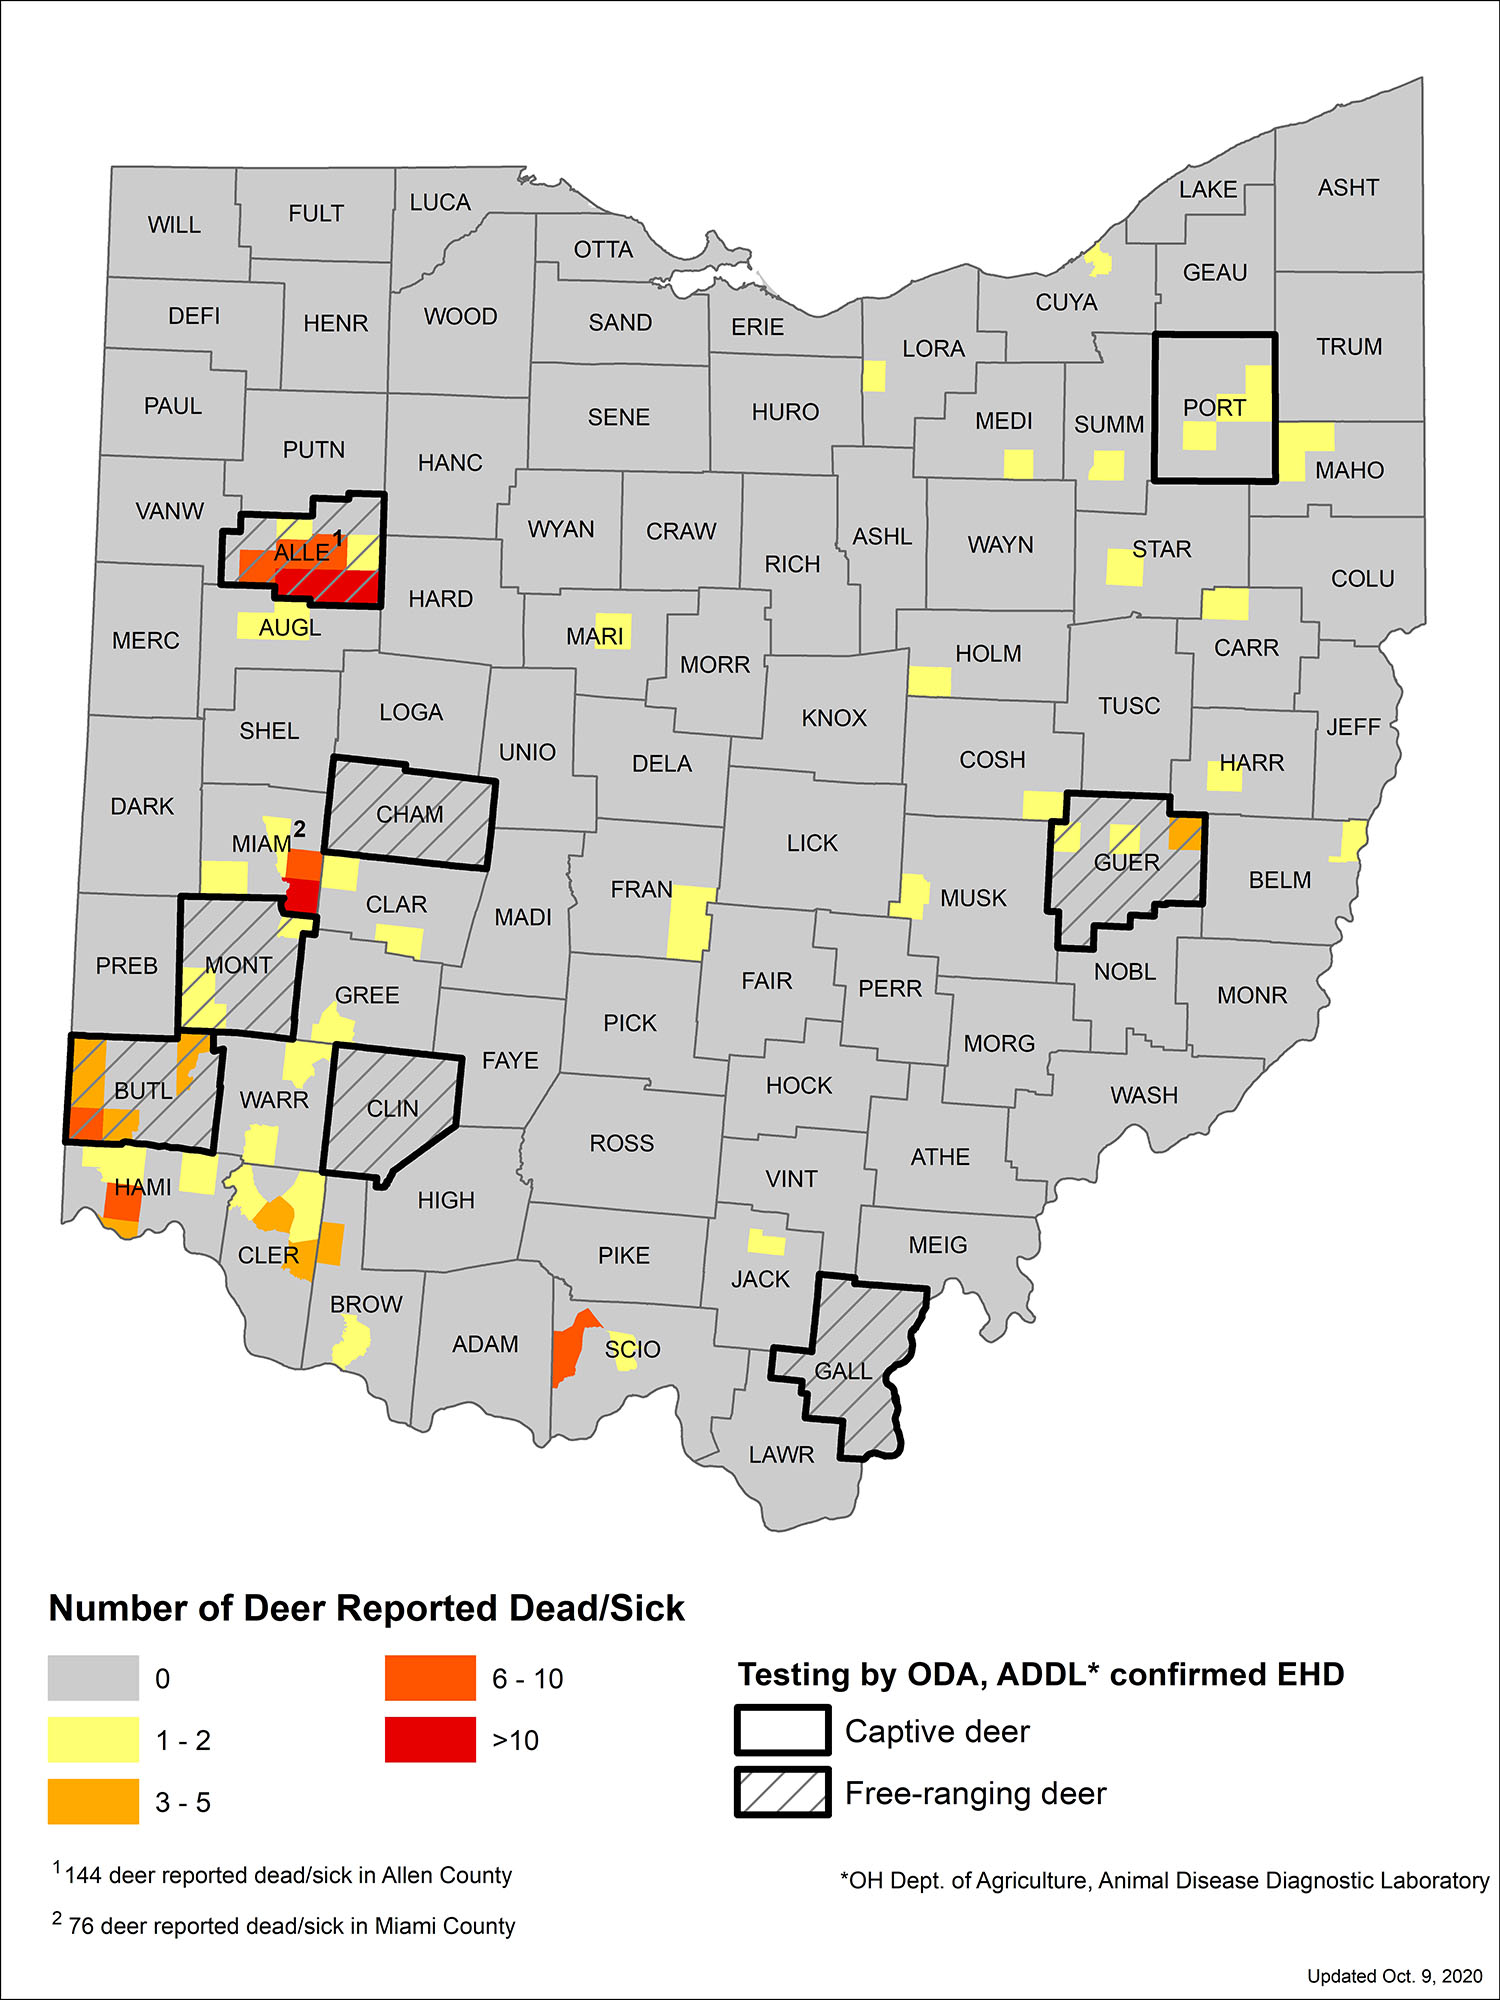 ODNR Confirms Deer Disease in Ross, Athens, and Other Counties in Ohio